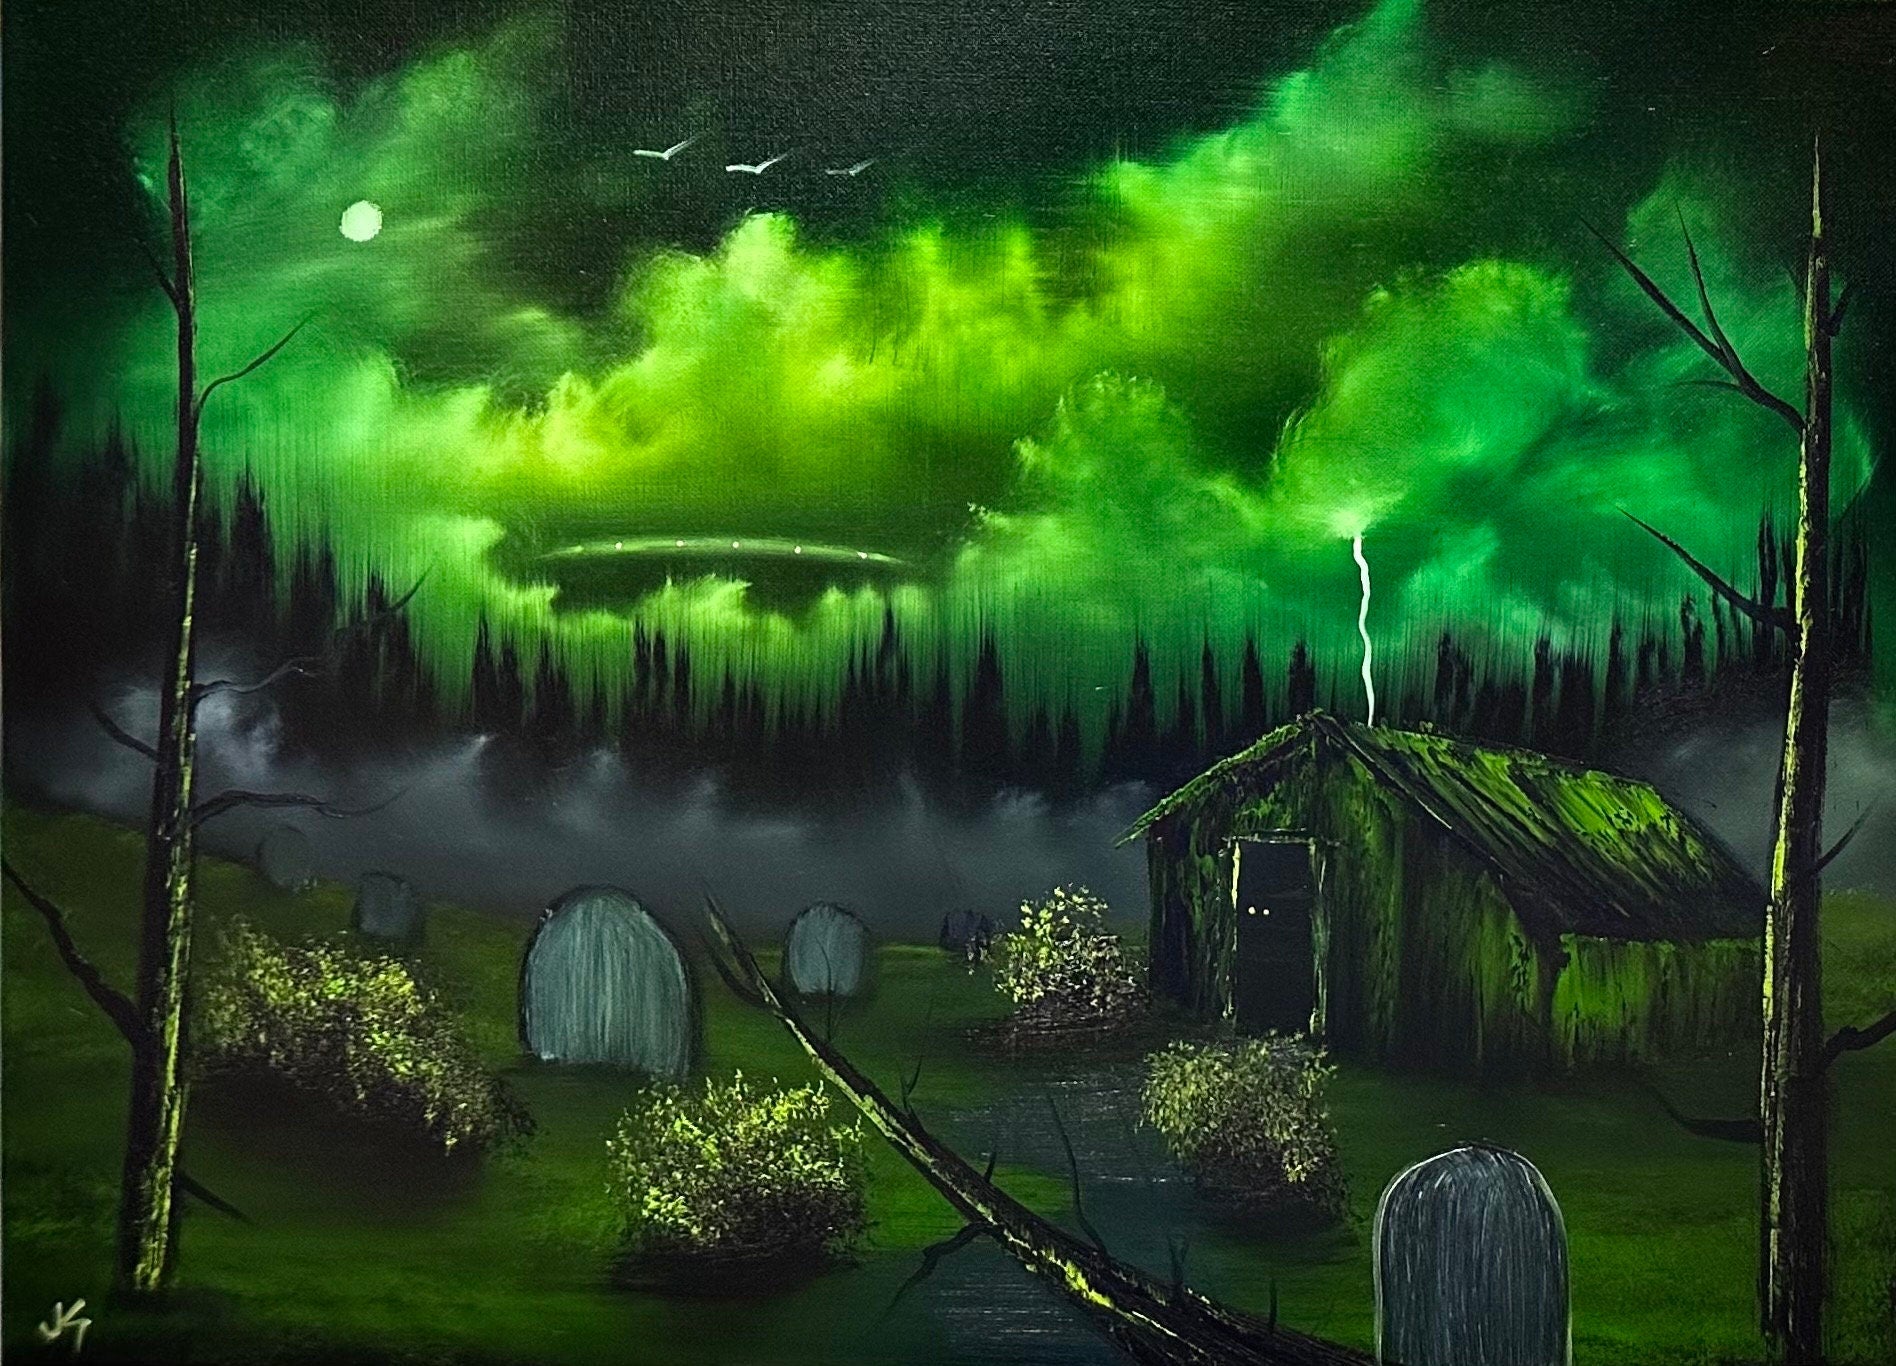 Painting 992 - 18x24" Halloween UFO Graveyard Landscape painted in Class on 10/23/23 by PaintWithJosh